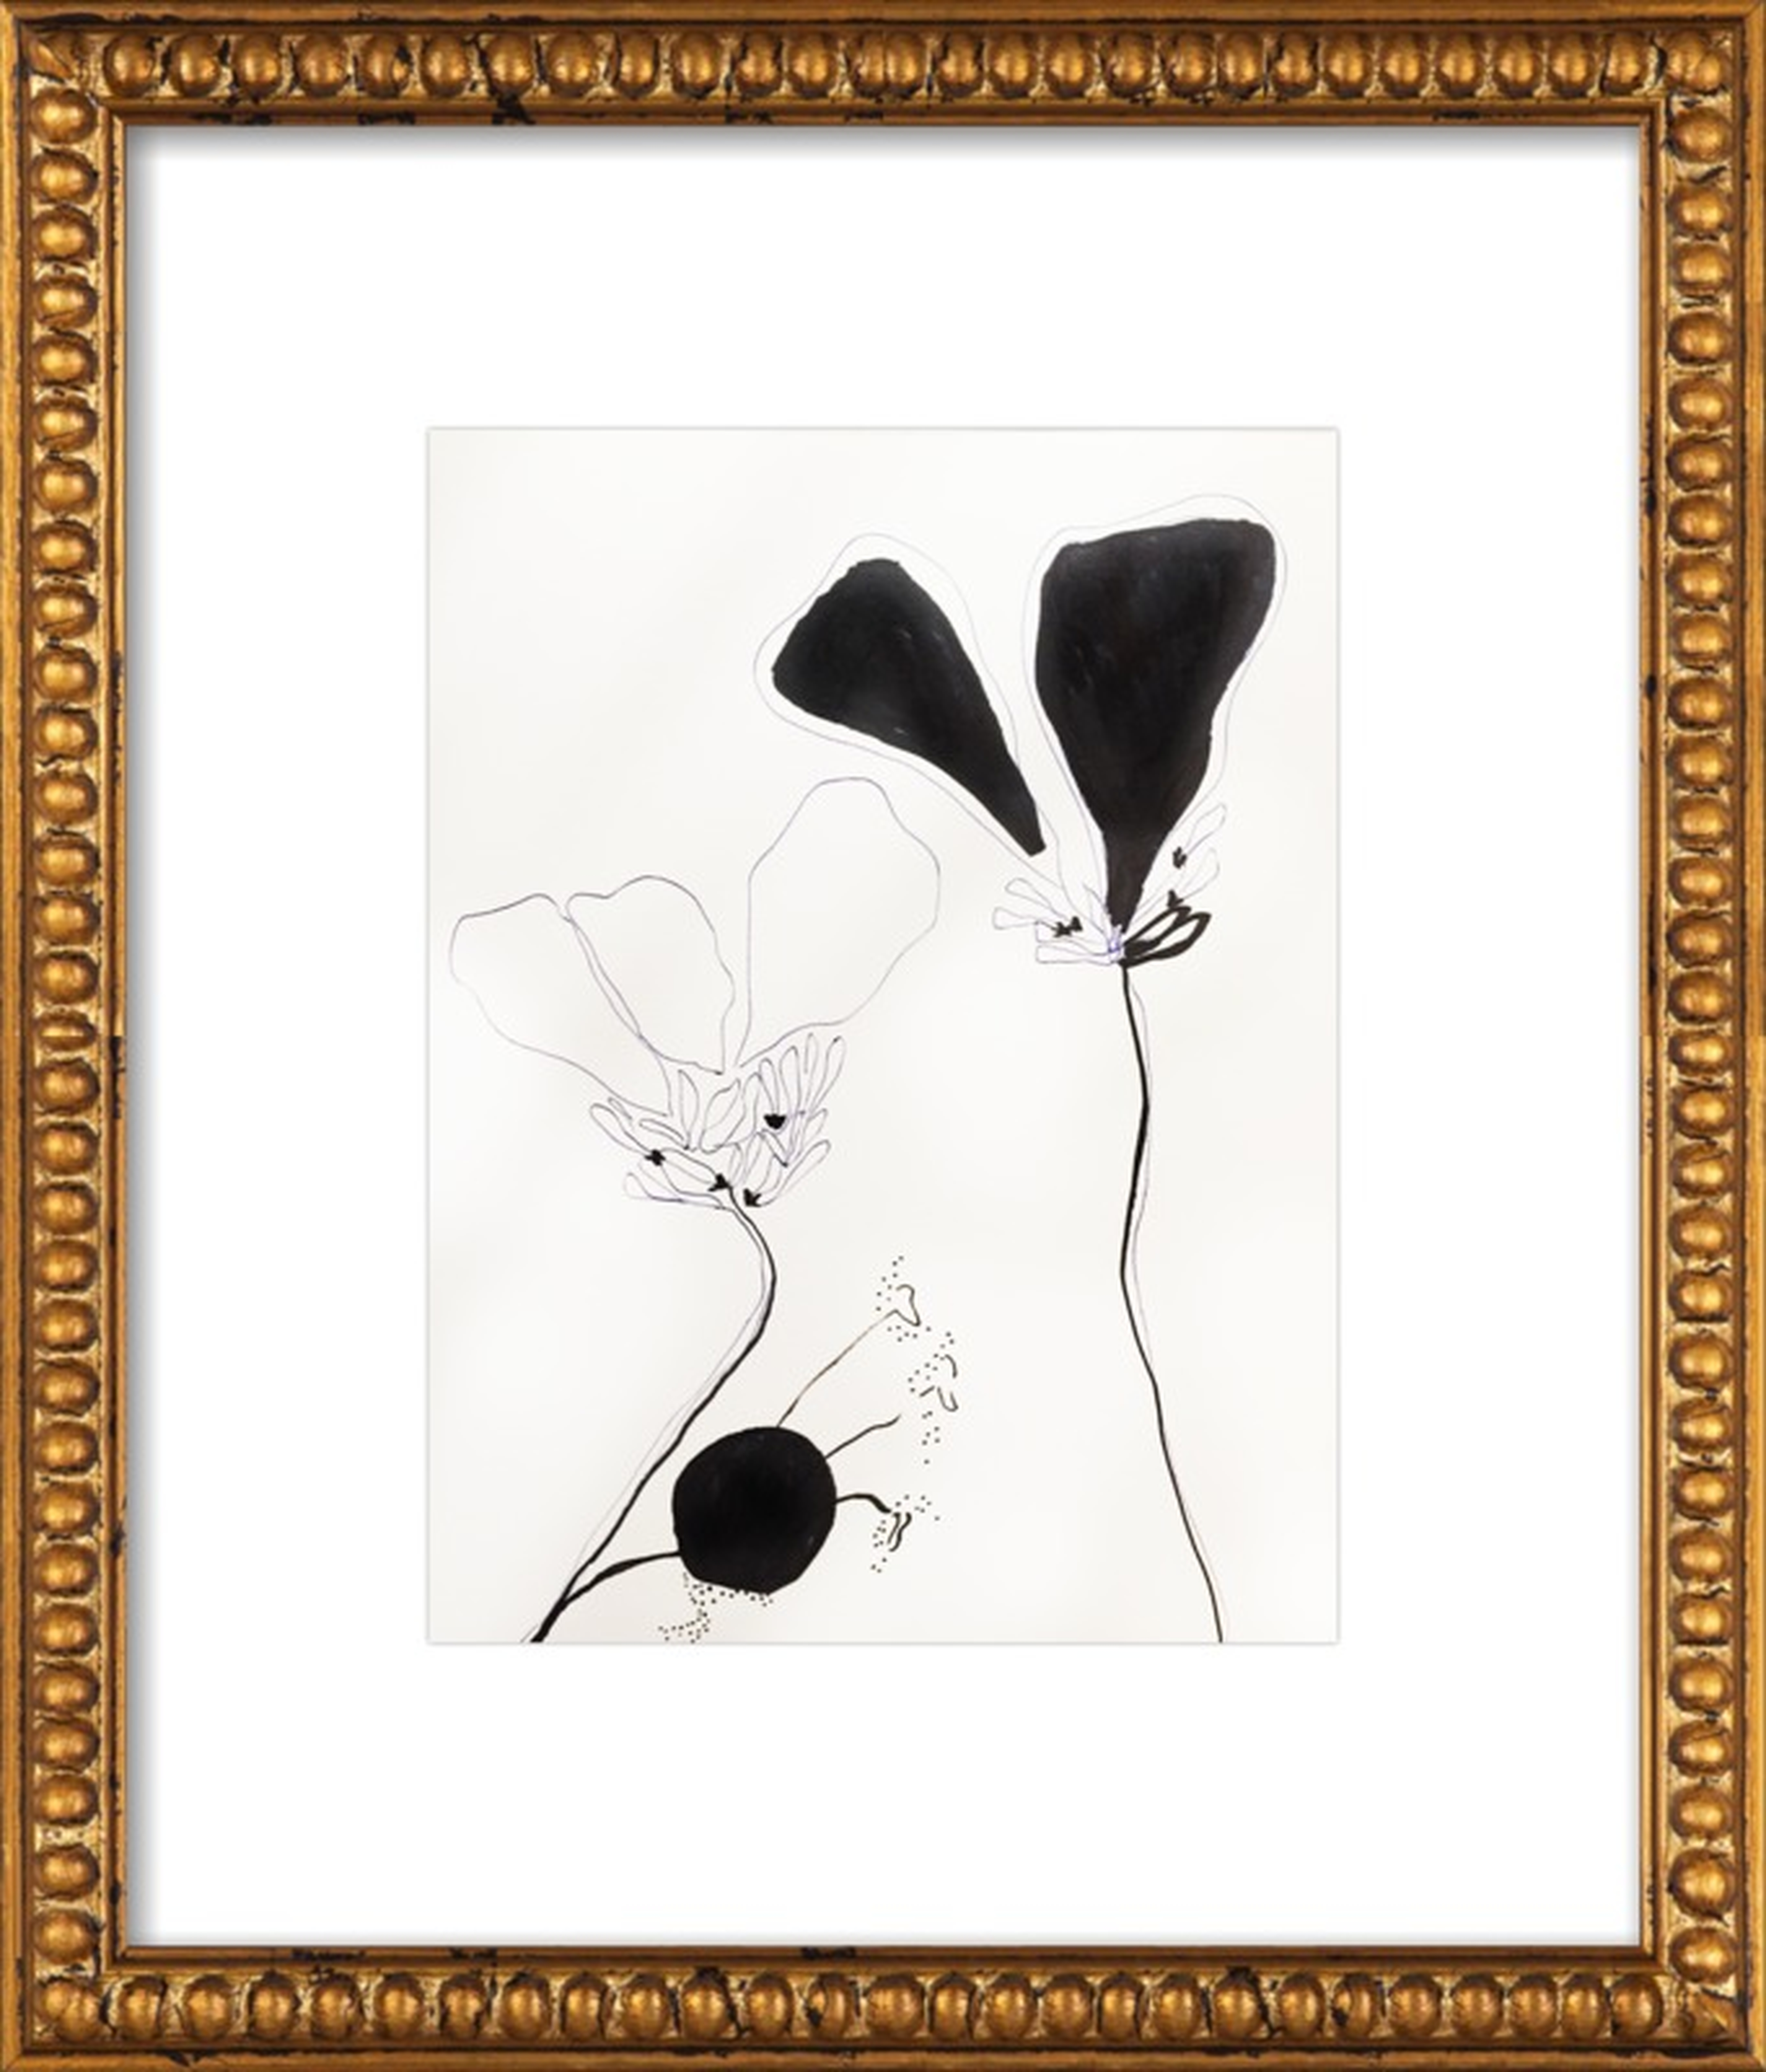 Flower Study 1 by Erin Armstrong for Artfully Walls, Gold Crackle Bead Wood, frame width 1.25", depth 1.125" - Artfully Walls